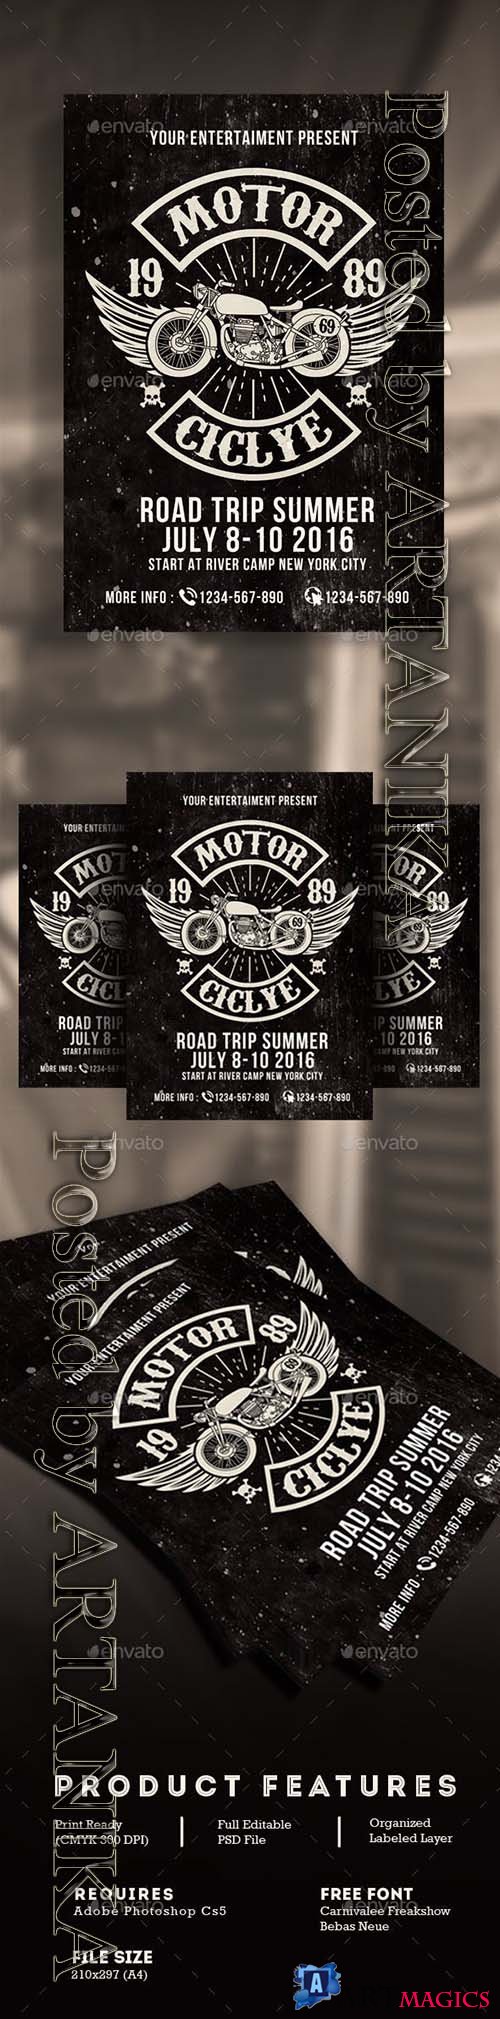 Graphicriver - Motorcycle Club Event 16792550